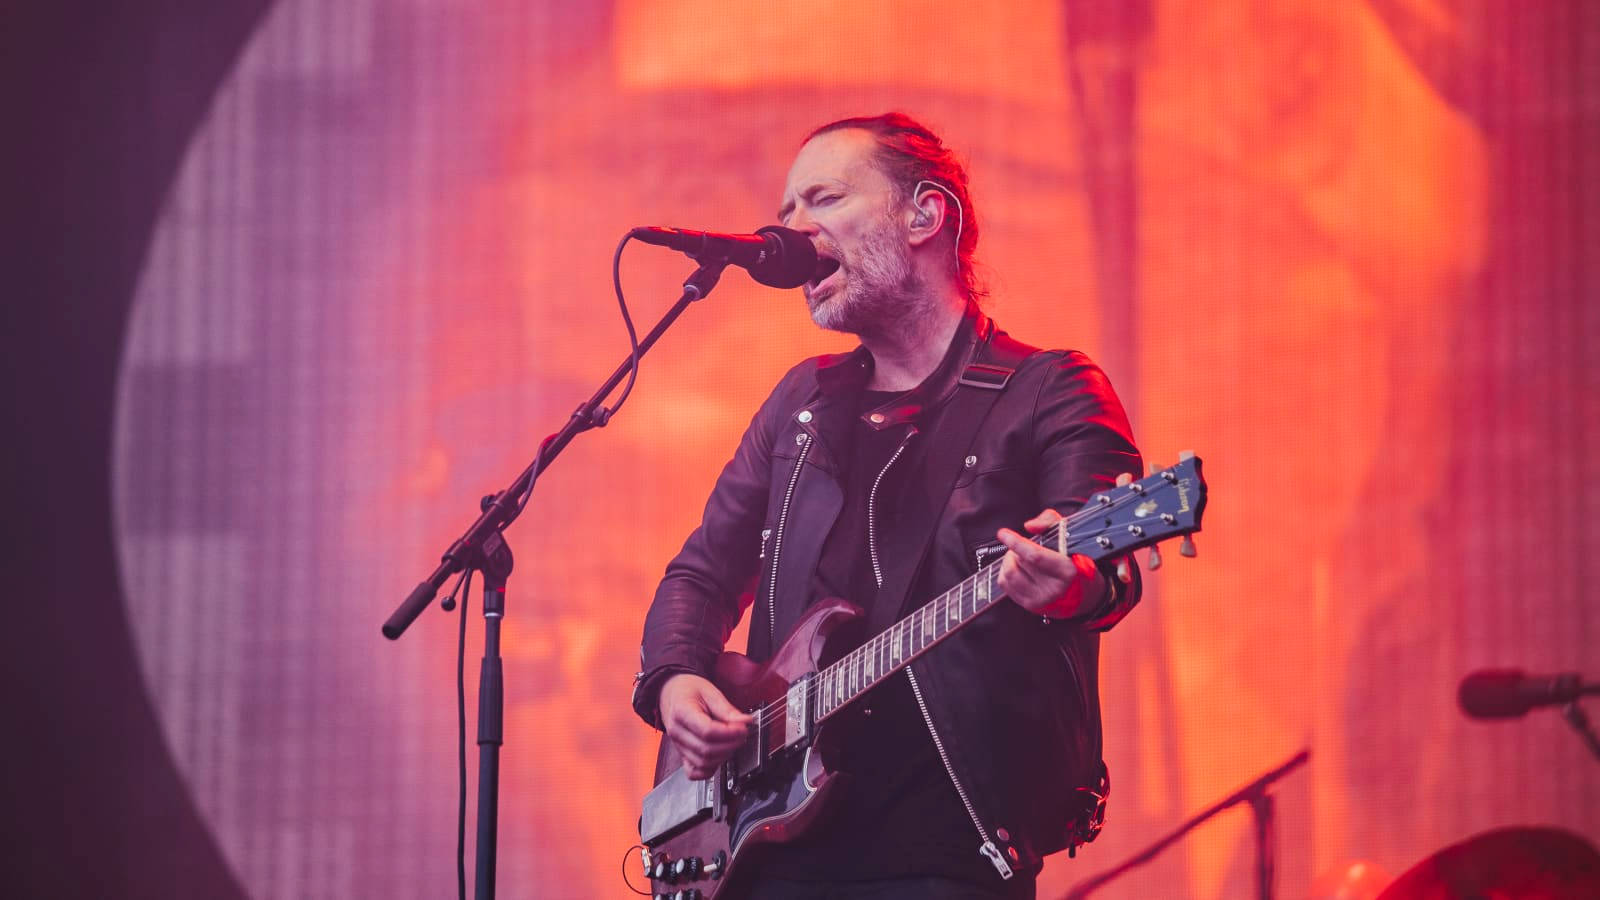 Radioheadthom Yorke Could Be Translated To German As 